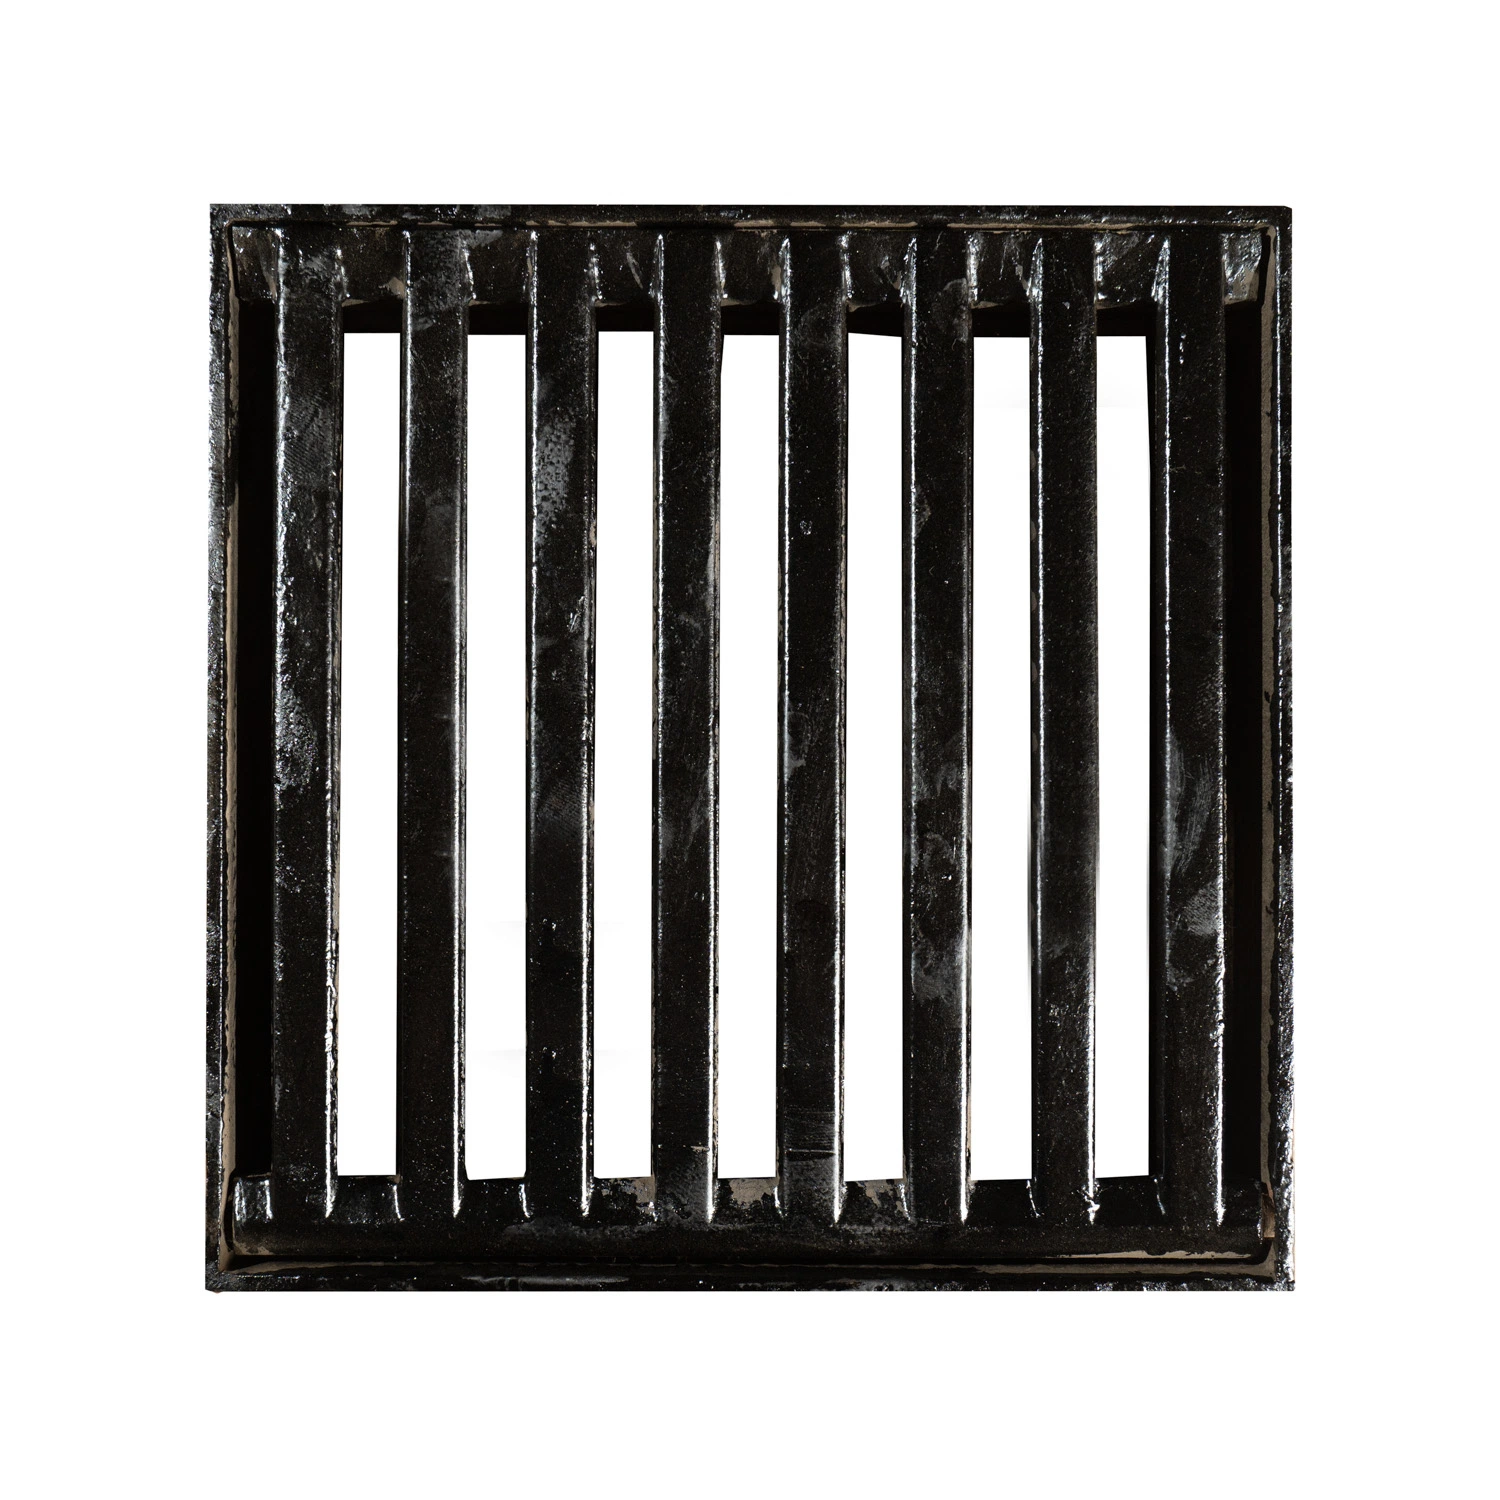 Ductile Gully Grate Cast Iron Manhole Cover Ductile Iron Drainage Manhole Grating Gully Grating